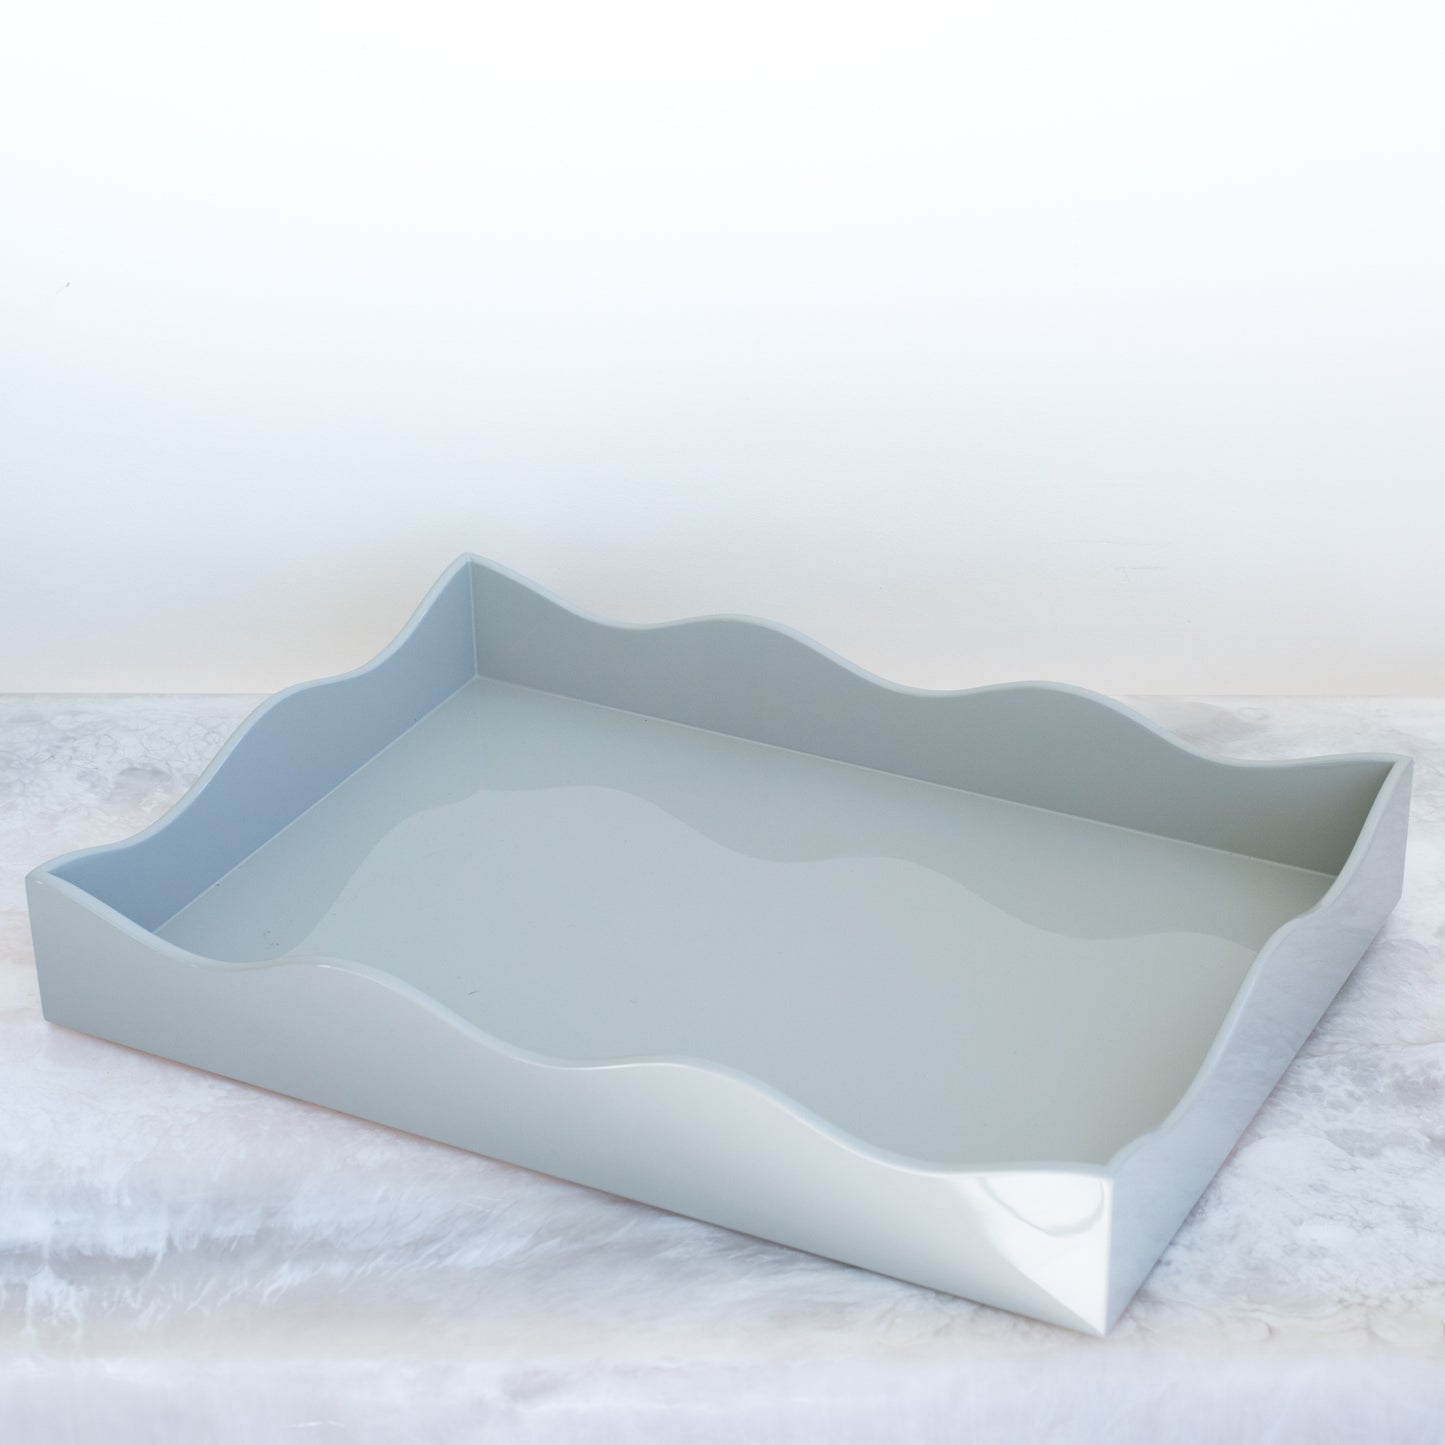 Medium Belles Rives Lacquer Tray - Pale Gray